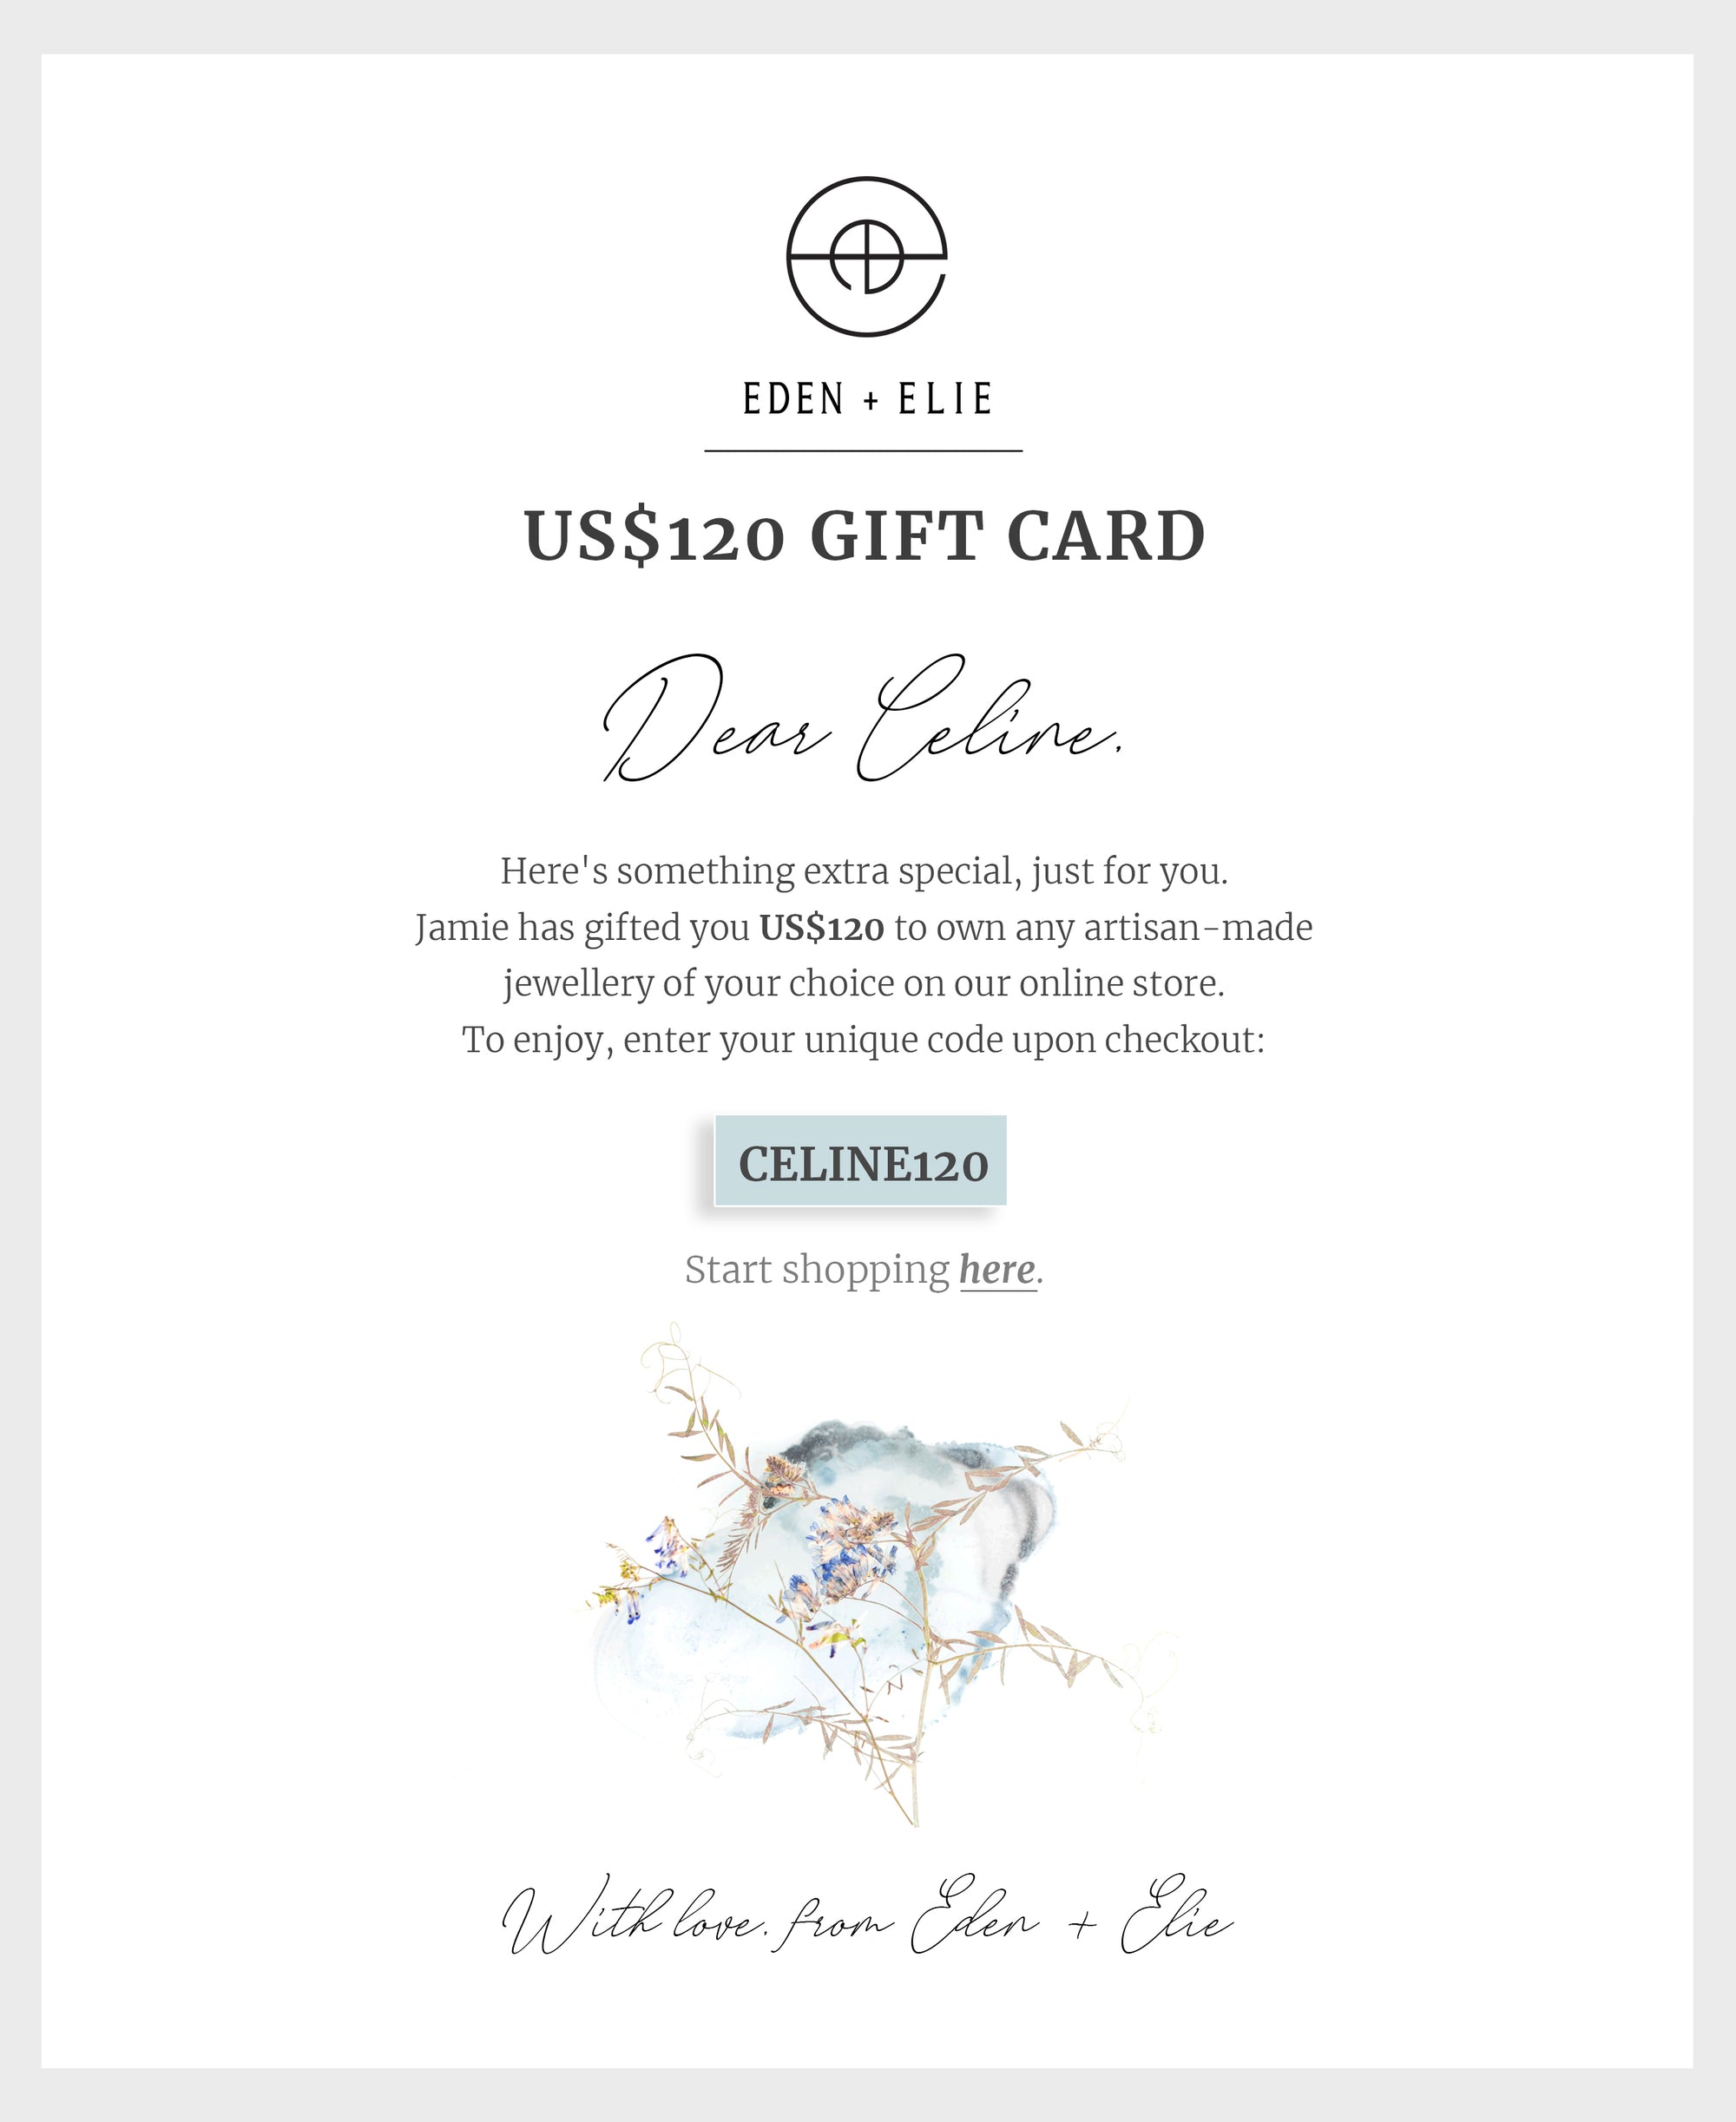 EDEN + ELIE Personalized E-Gift Card - $120